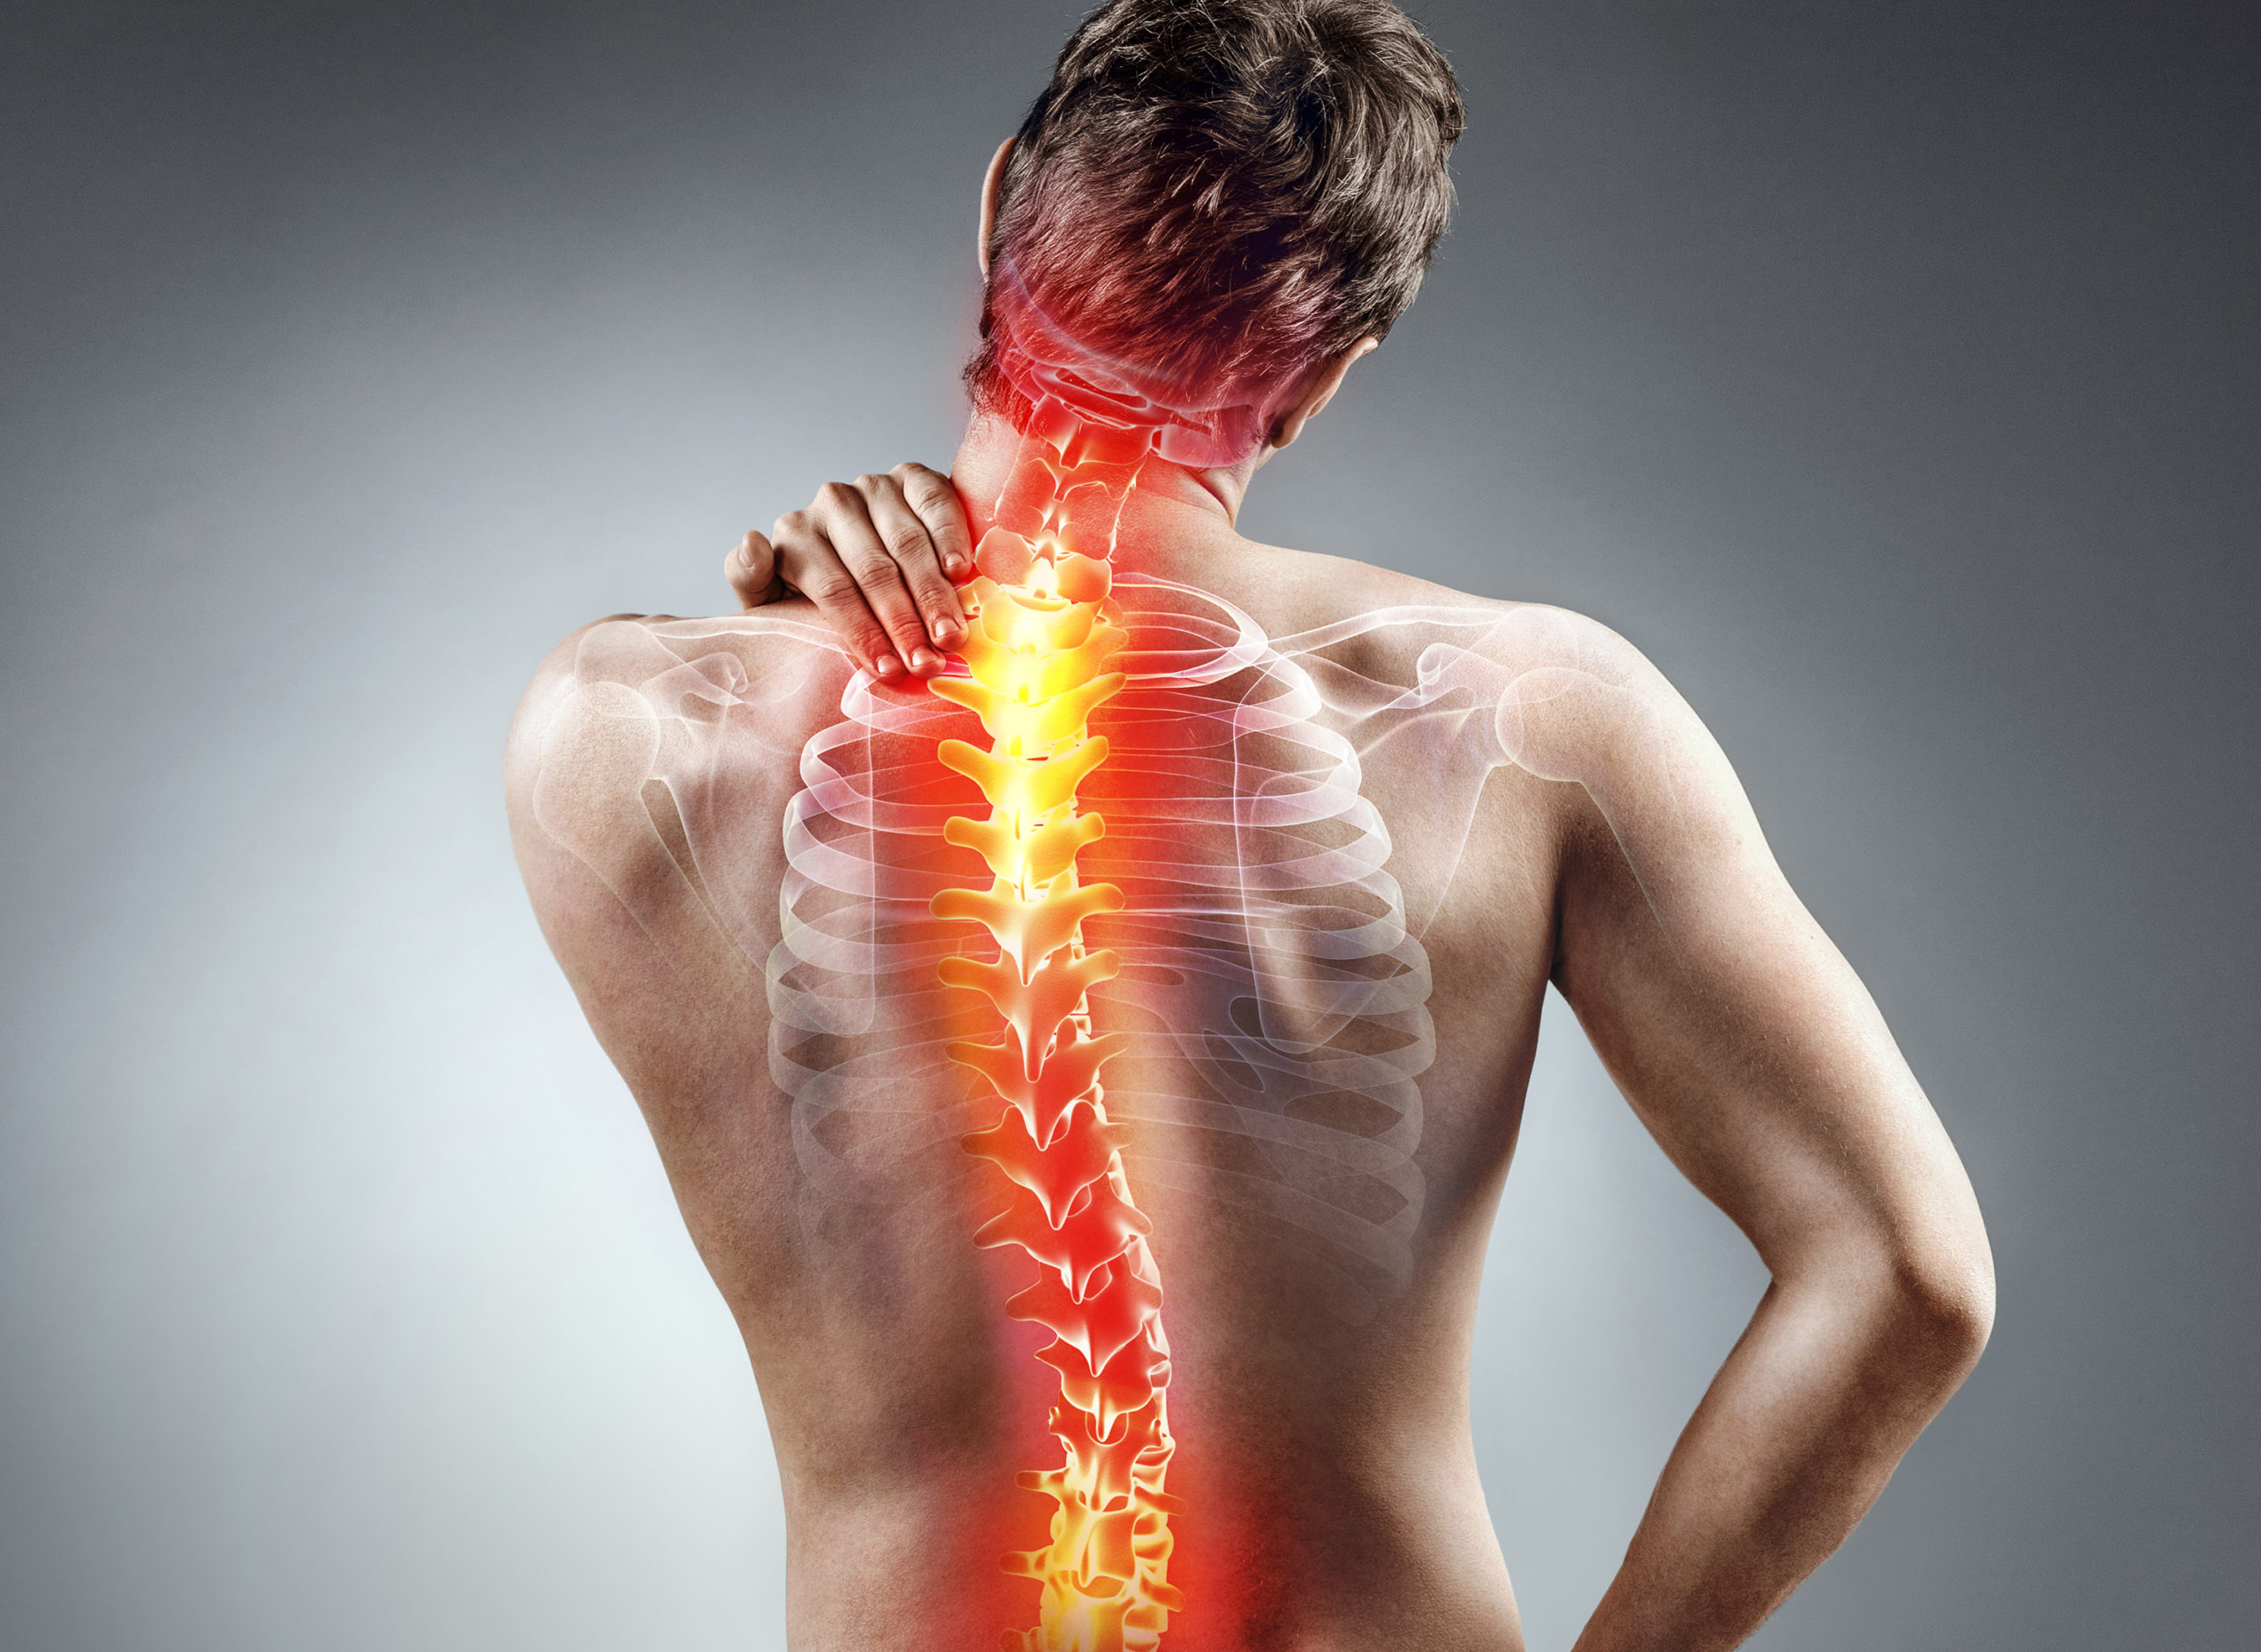 Neck And Back Pain